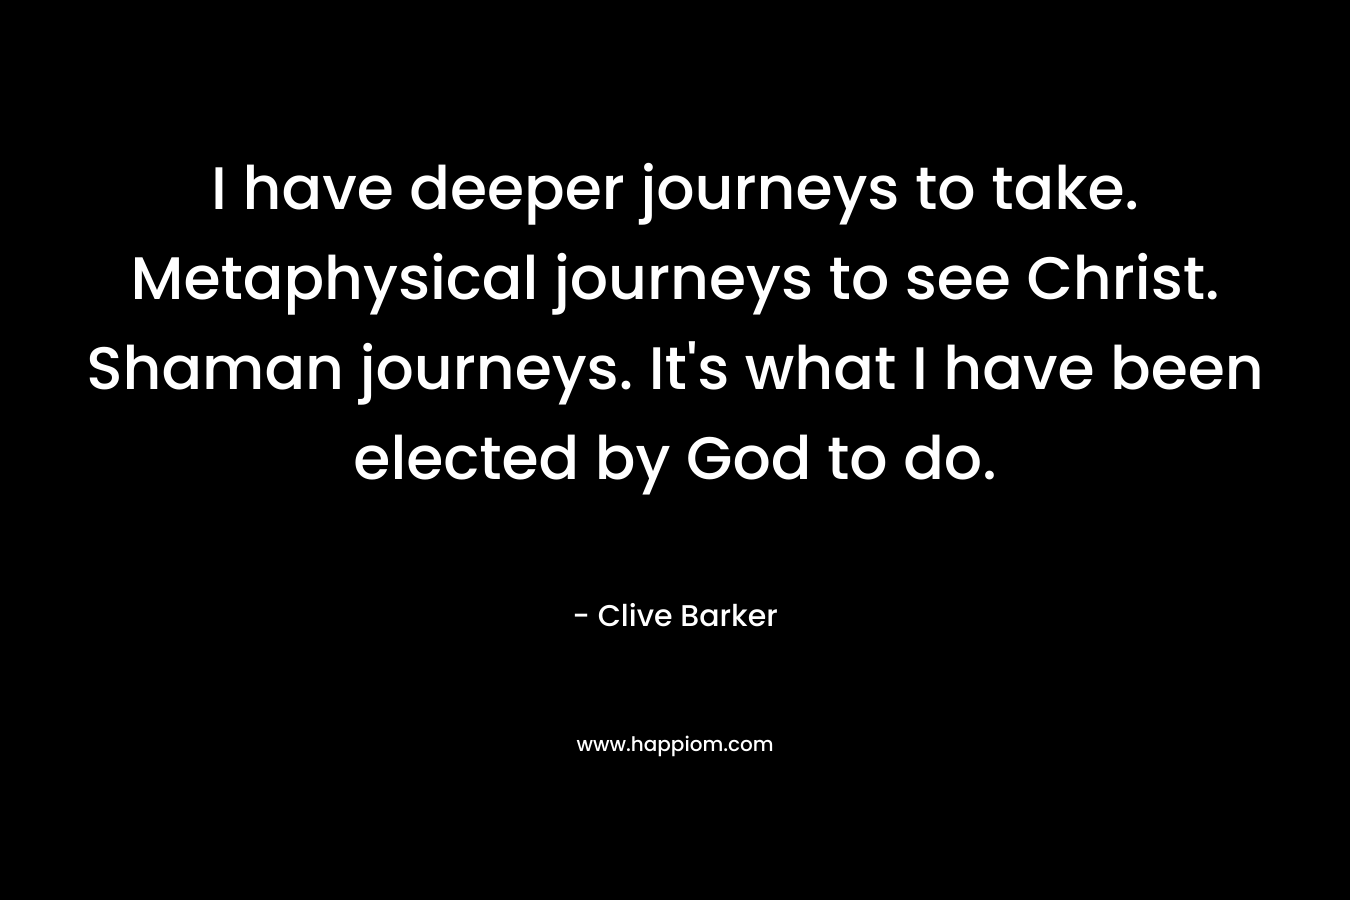 I have deeper journeys to take. Metaphysical journeys to see Christ. Shaman journeys. It’s what I have been elected by God to do. – Clive Barker